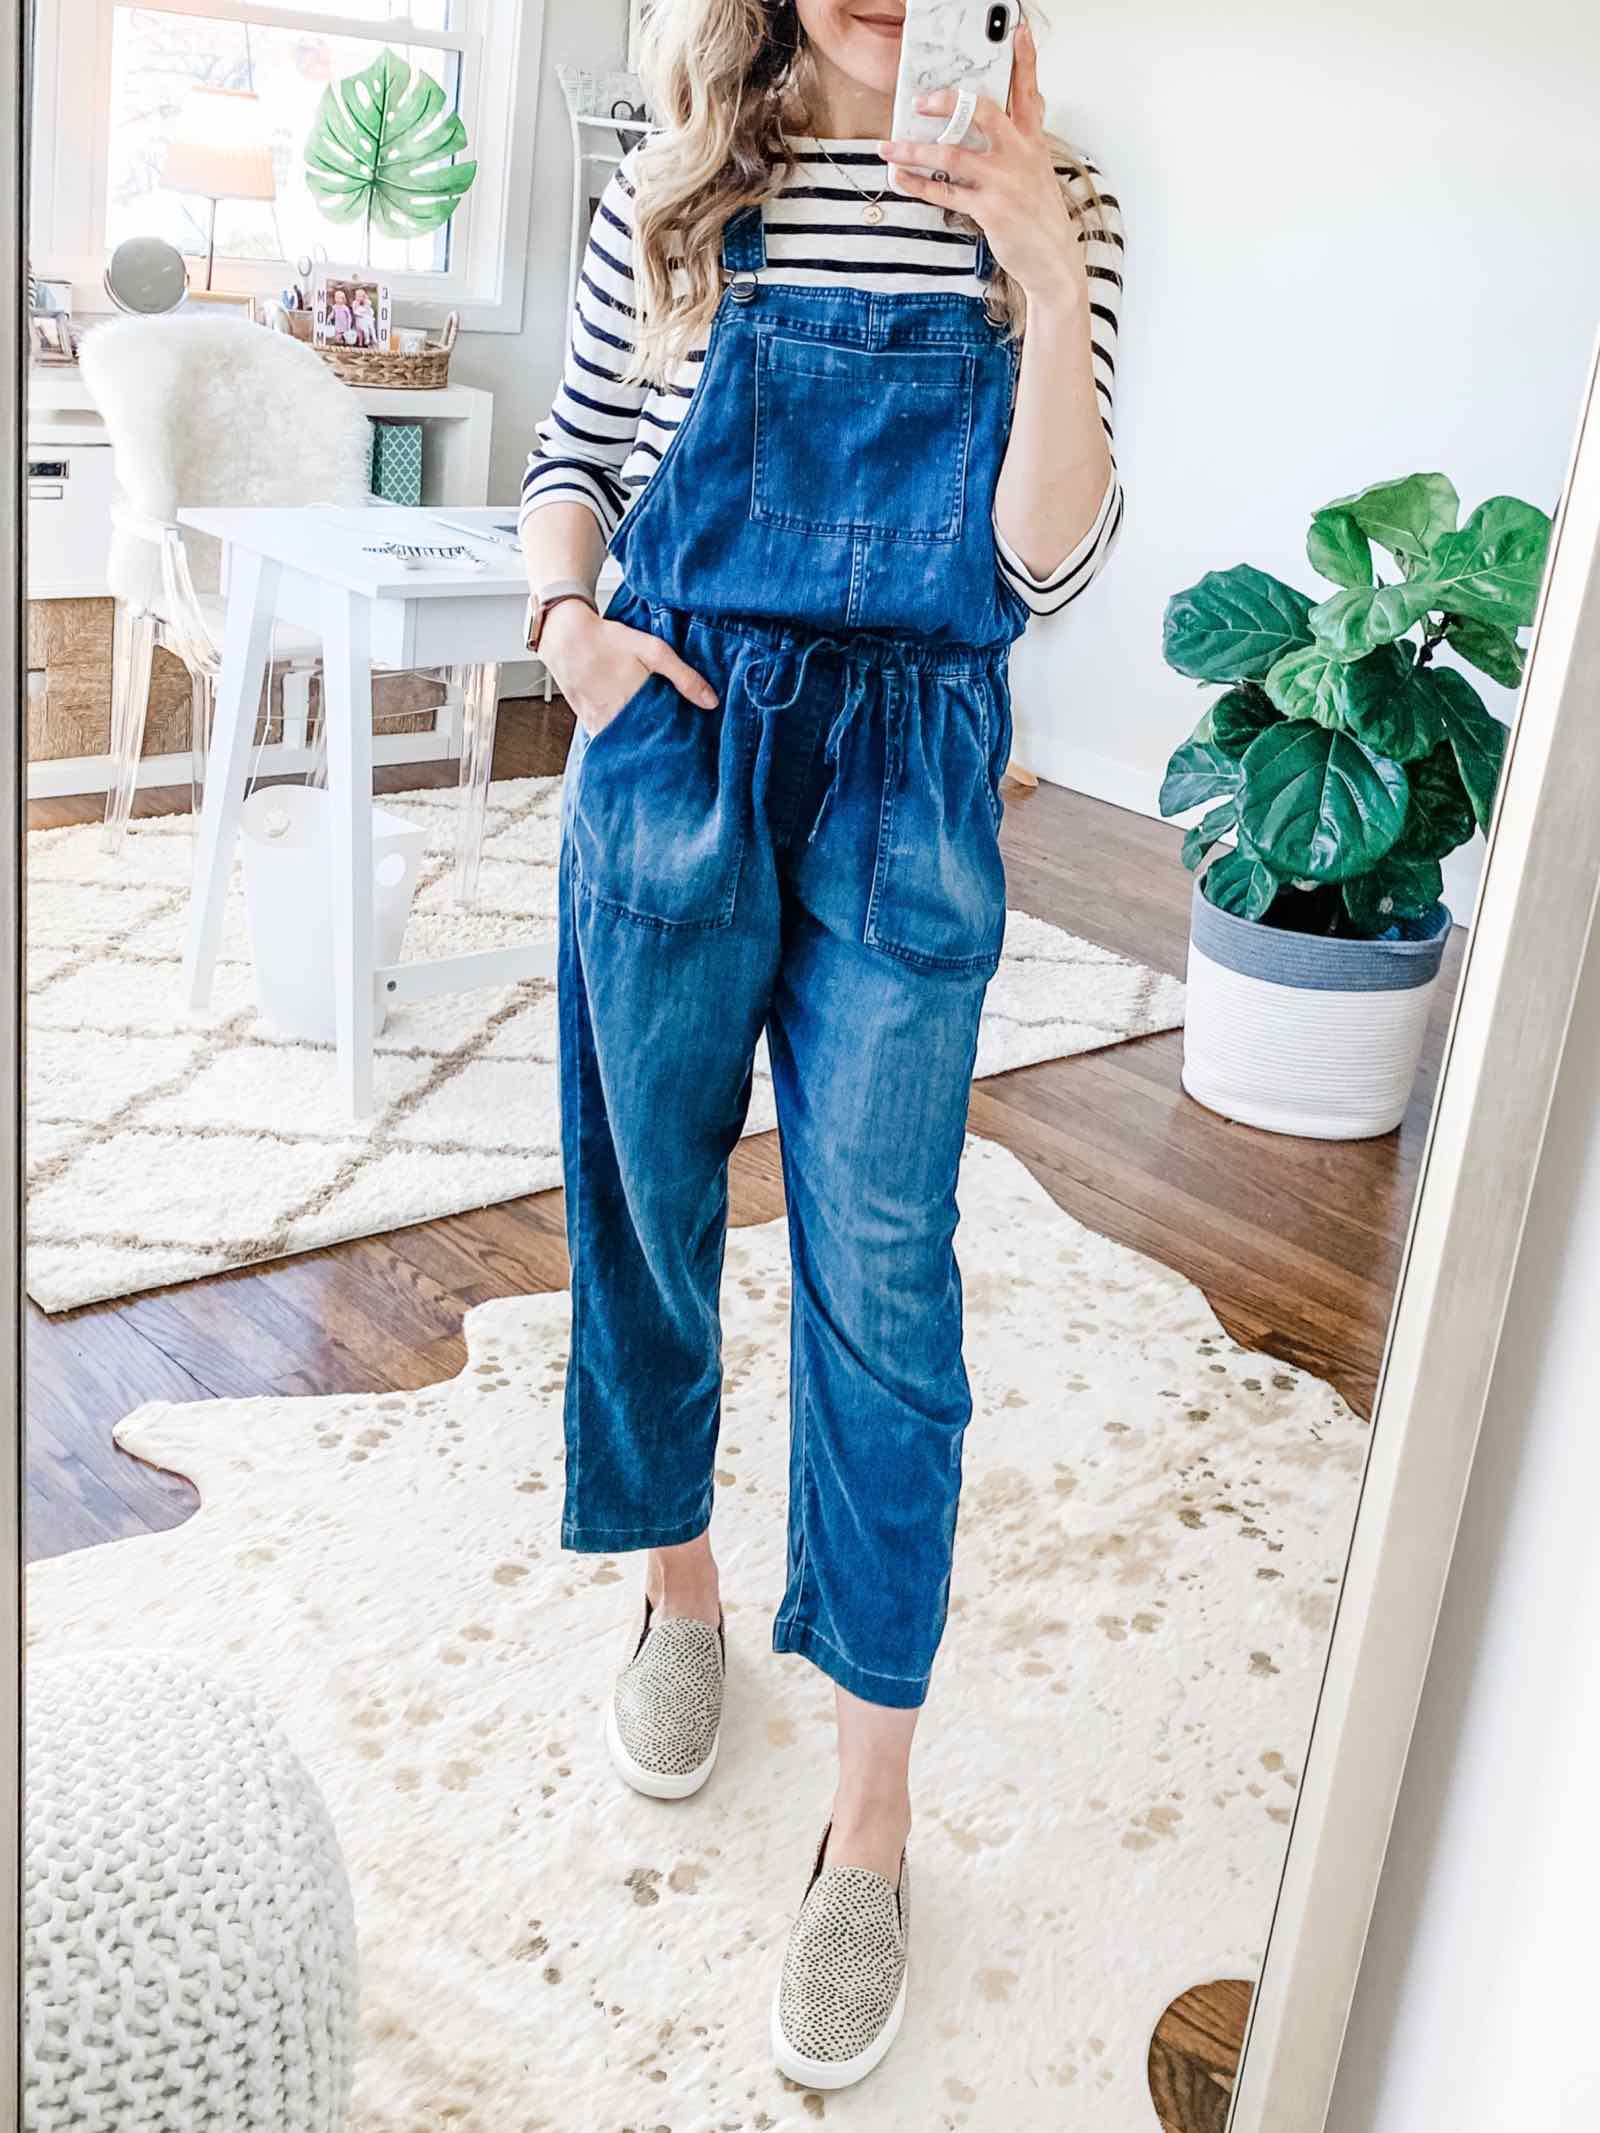 Love these overalls! $29 at Walmart